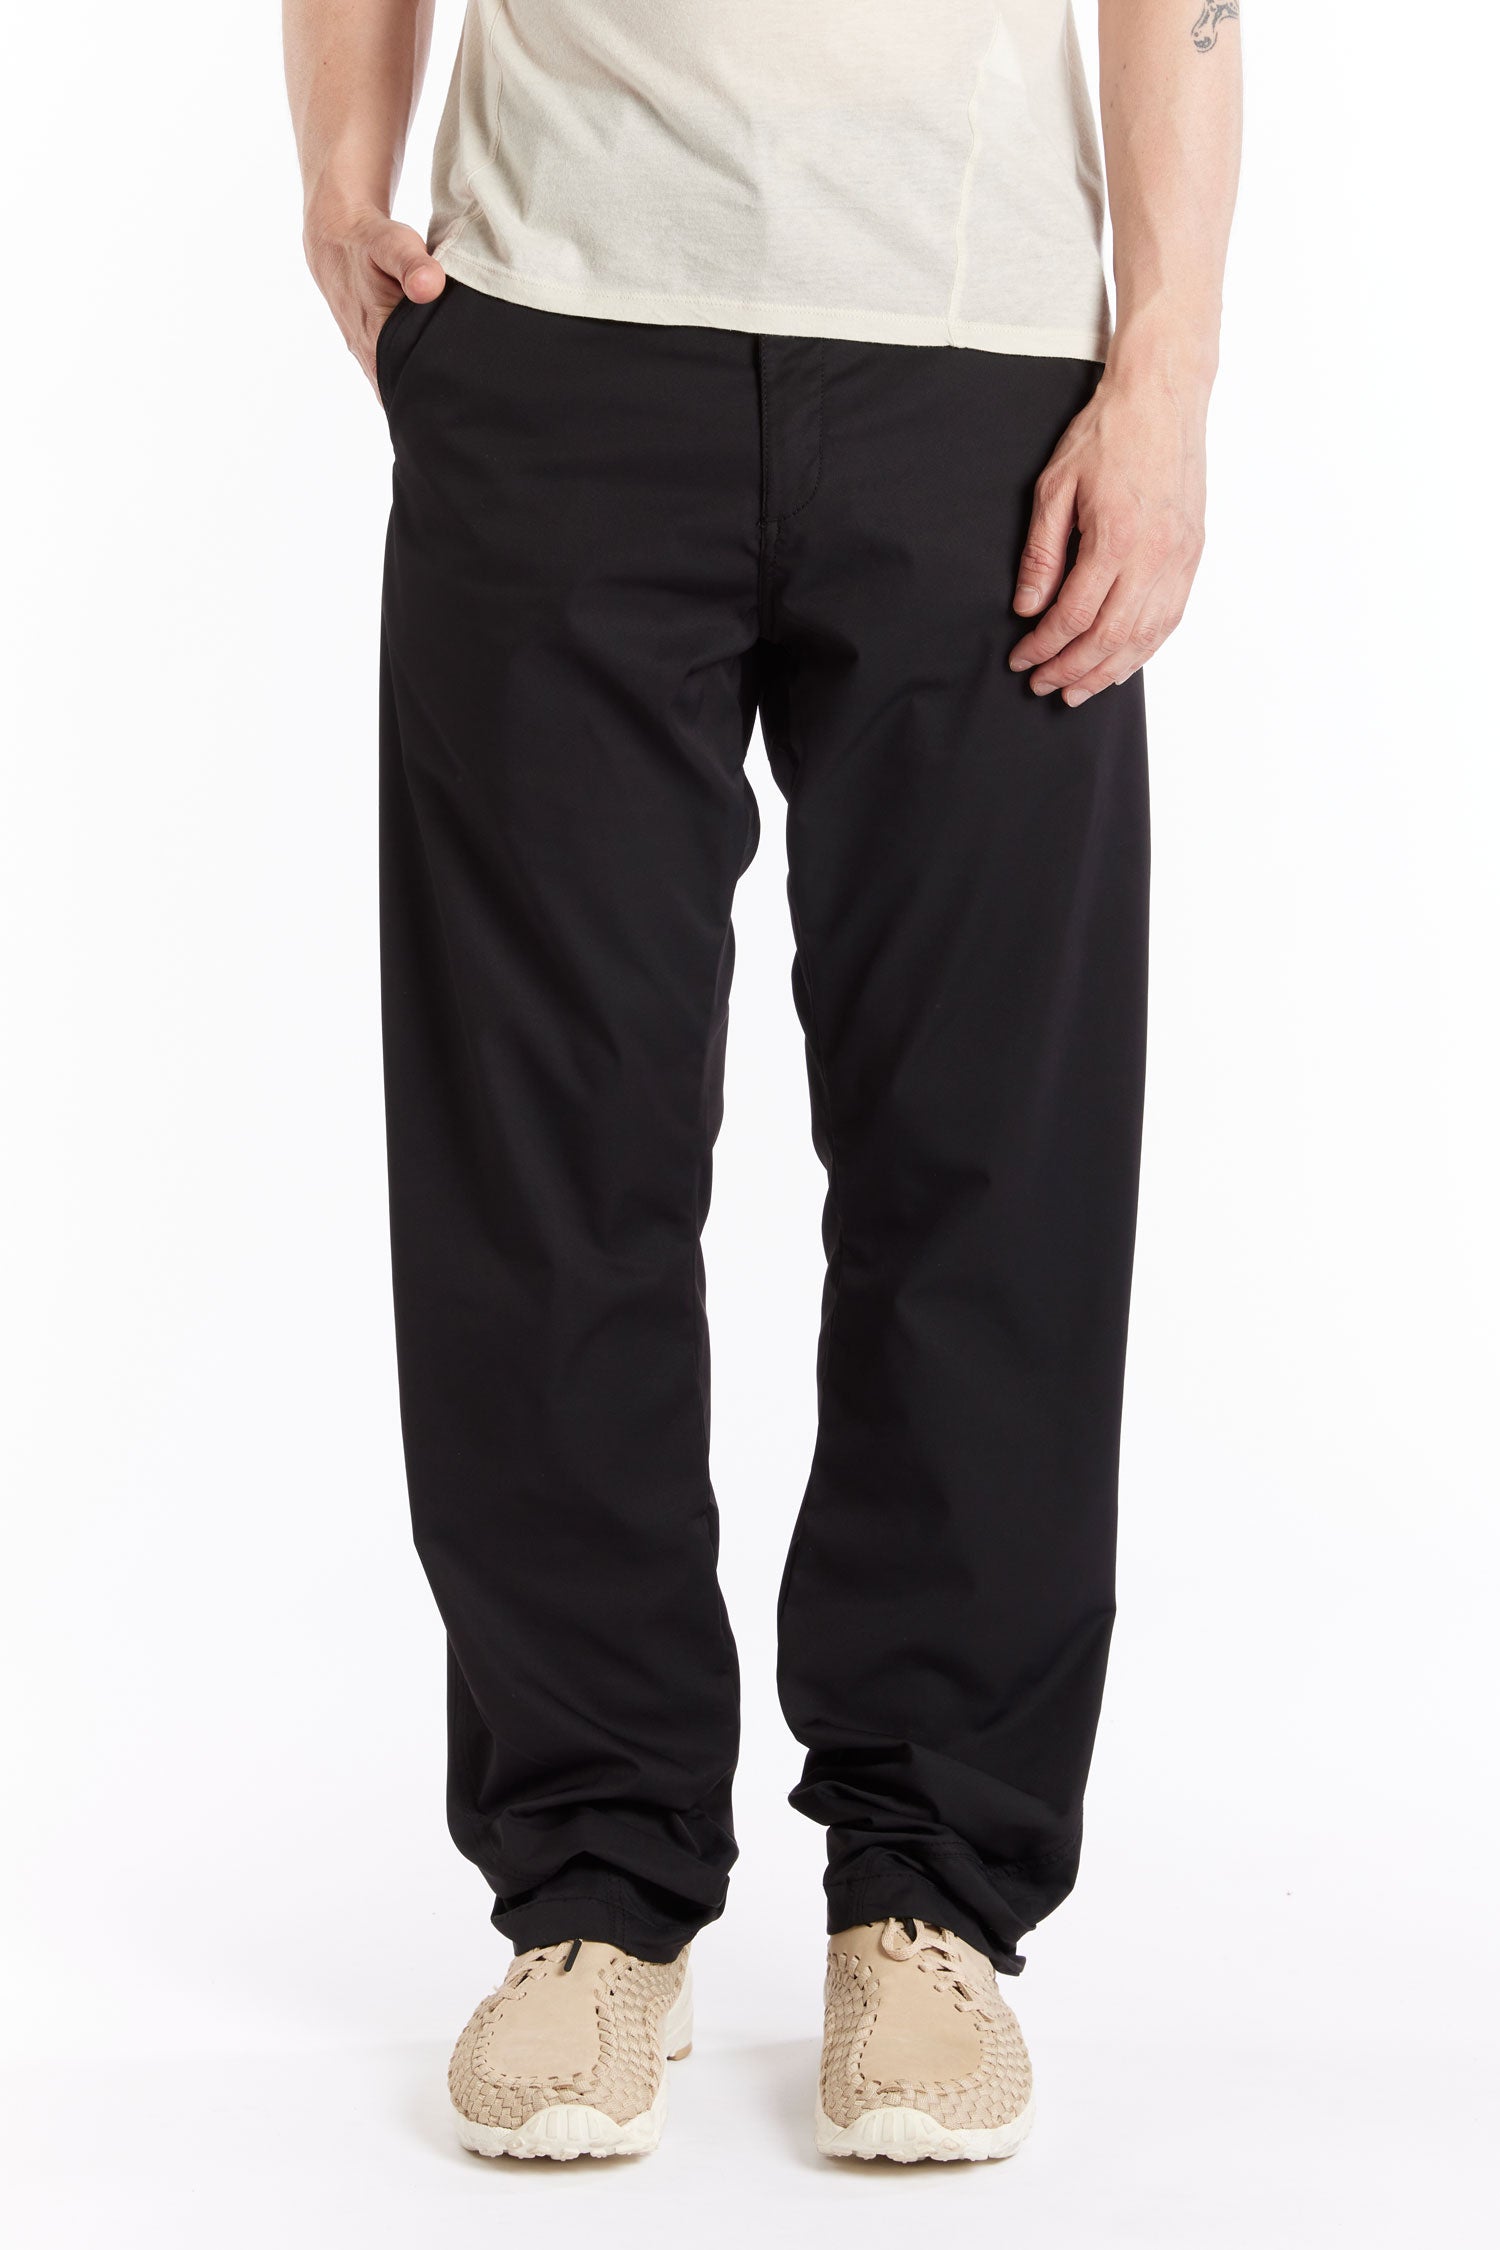 The AFFXWRKS - CURVED PANT BLACK  available online with global shipping, and in PAM Stores Melbourne and Sydney.